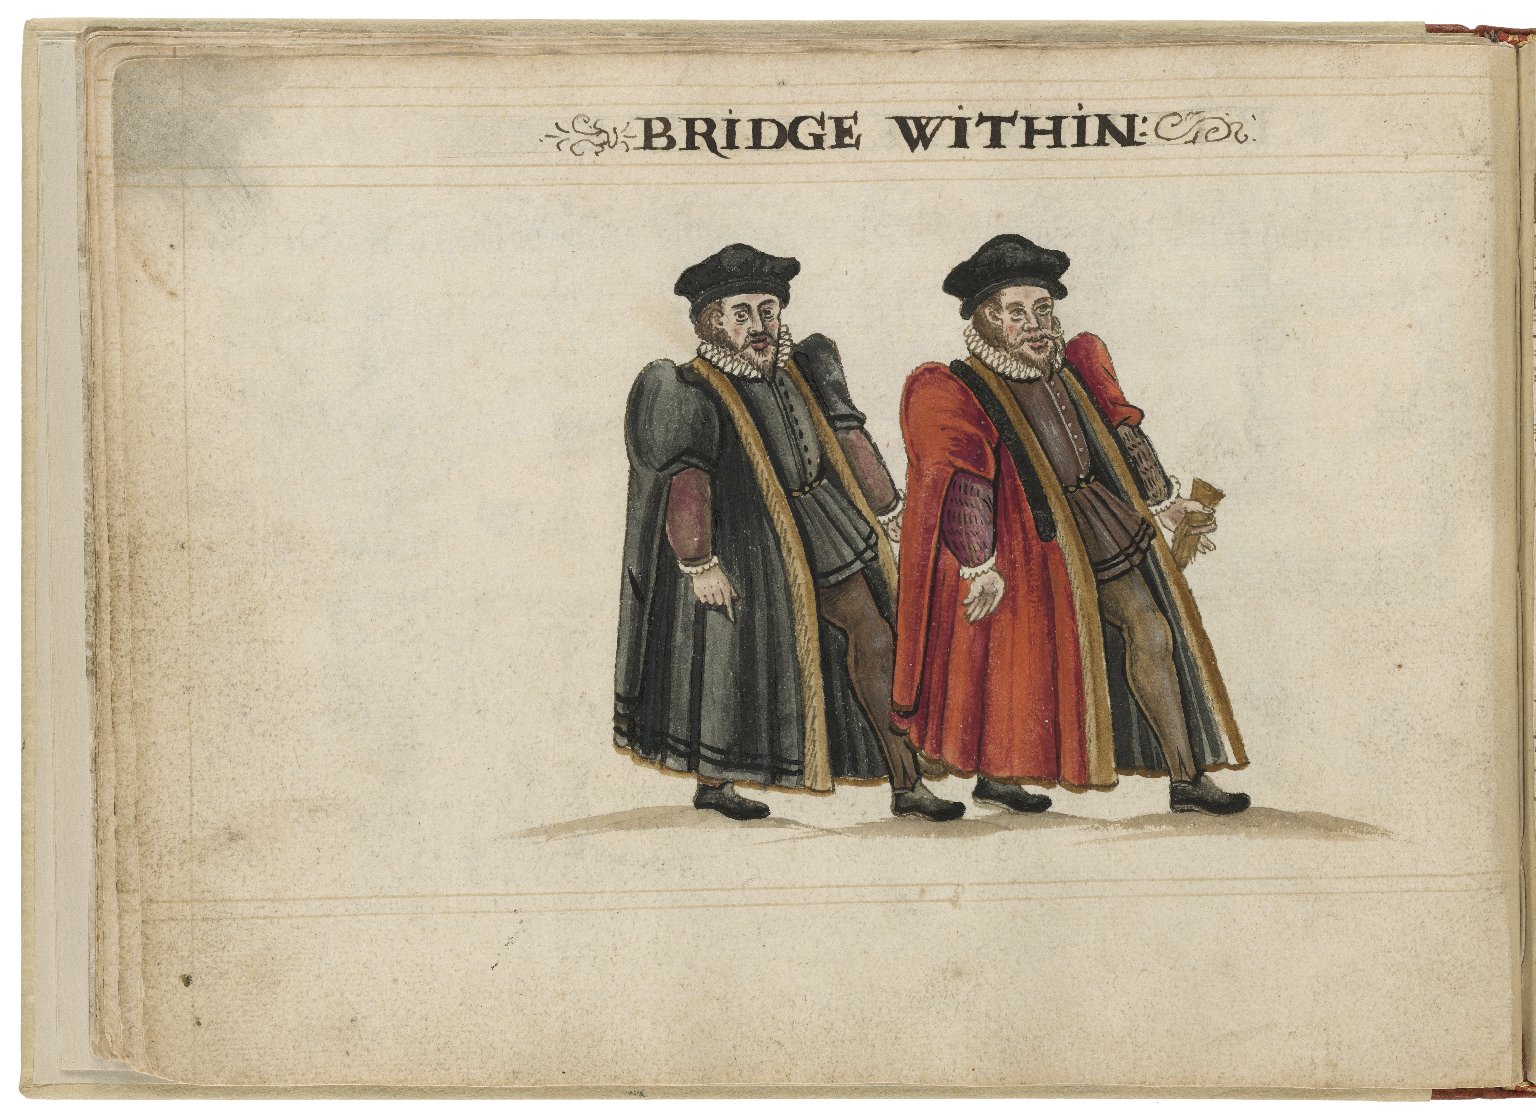 Watercolour painting of the alderman and deputy in charge of Bridge Within Ward by Hugh Alley. Image courtesy of the Folger Digital Image Collection.